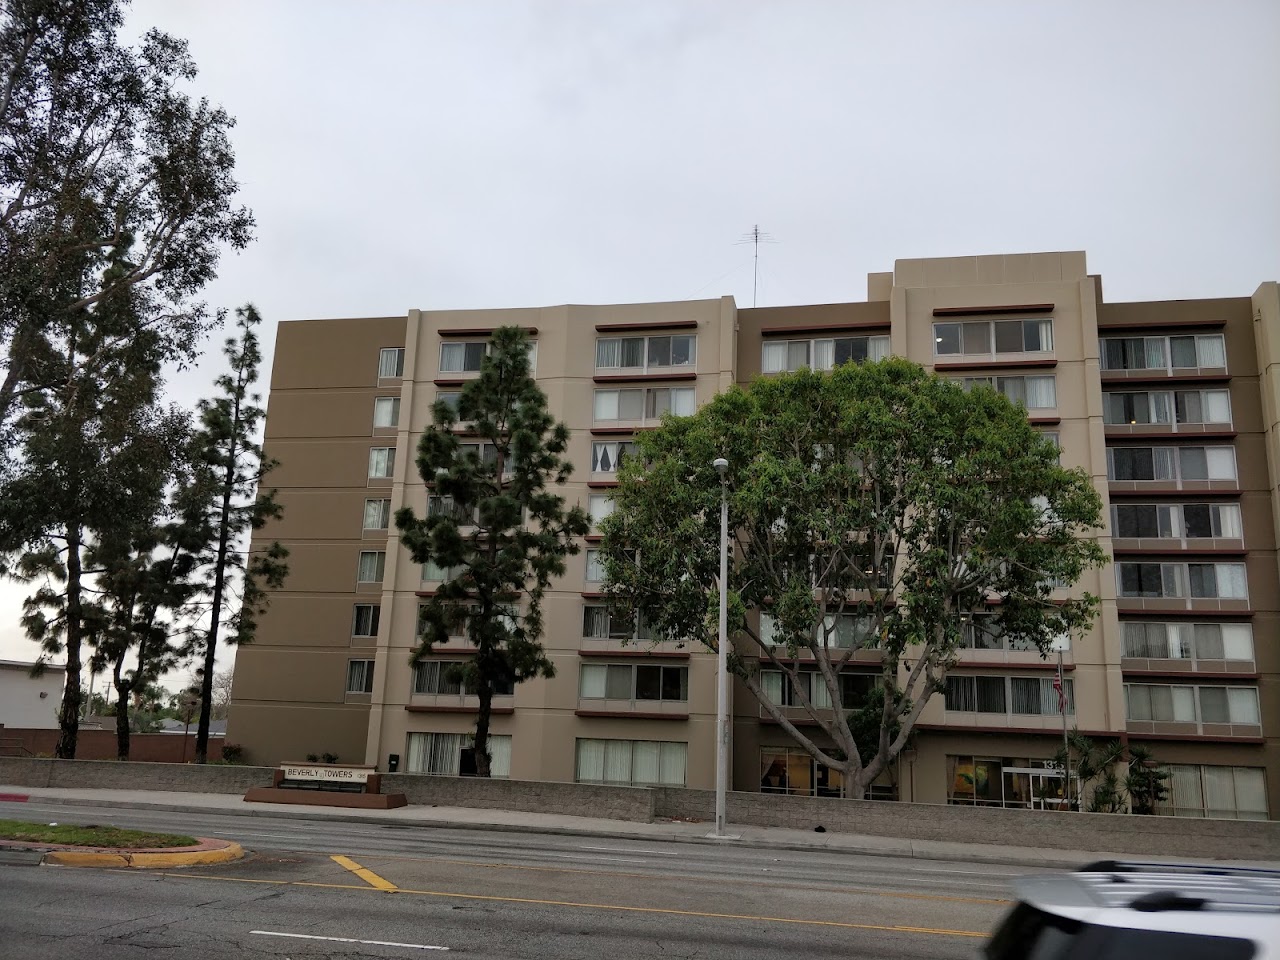 Photo of BEVERLY TOWERS at 1315 W BEVERLY BLVD MONTEBELLO, CA 90640